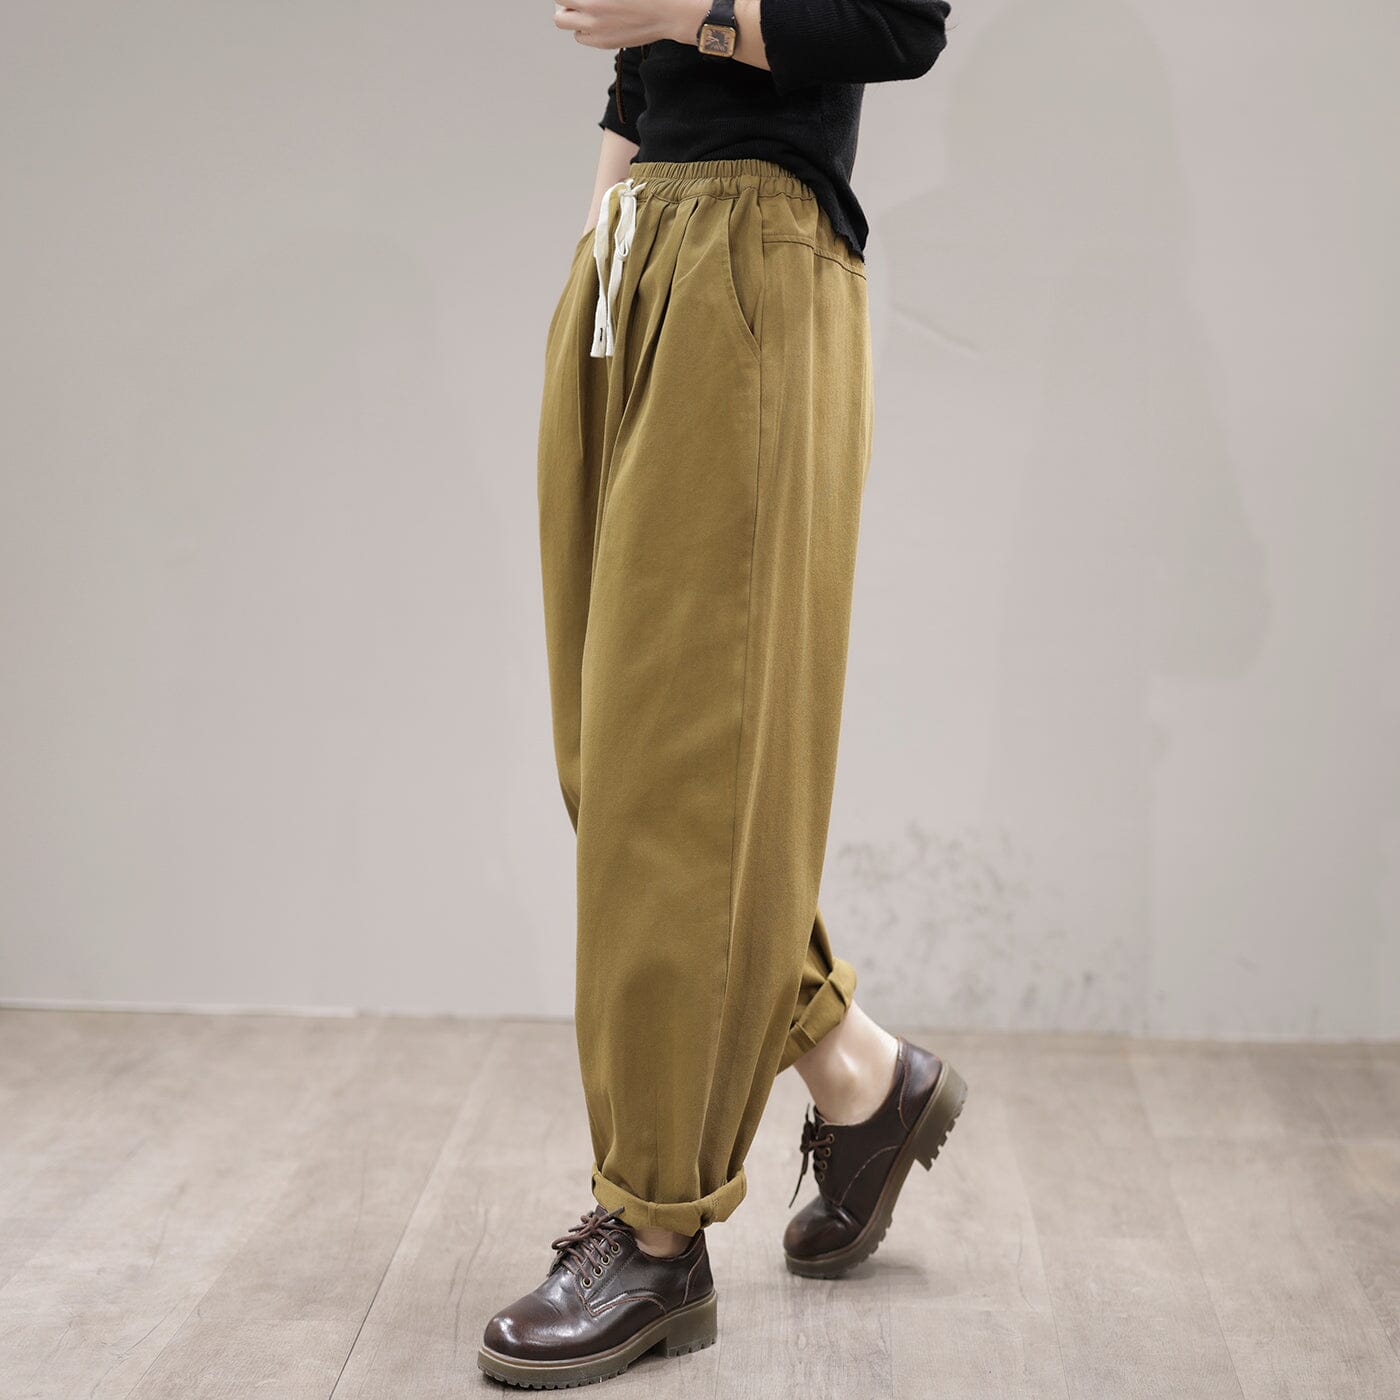 Spring Casual Loose Cotton Harem Pants Jan 2023 New Arrival 